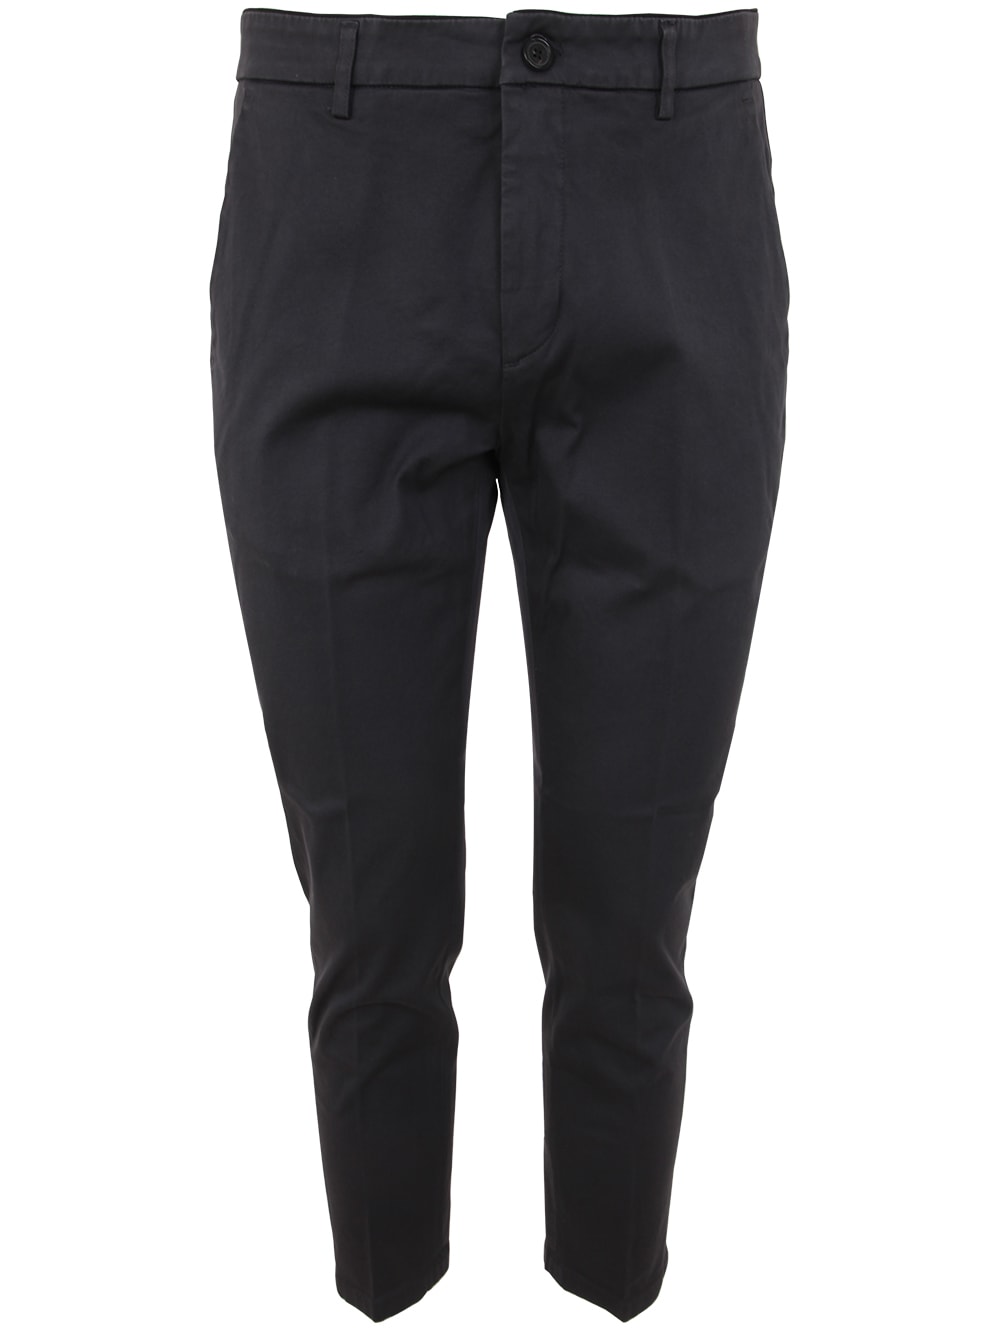 Prince Chinos Crop Trousers